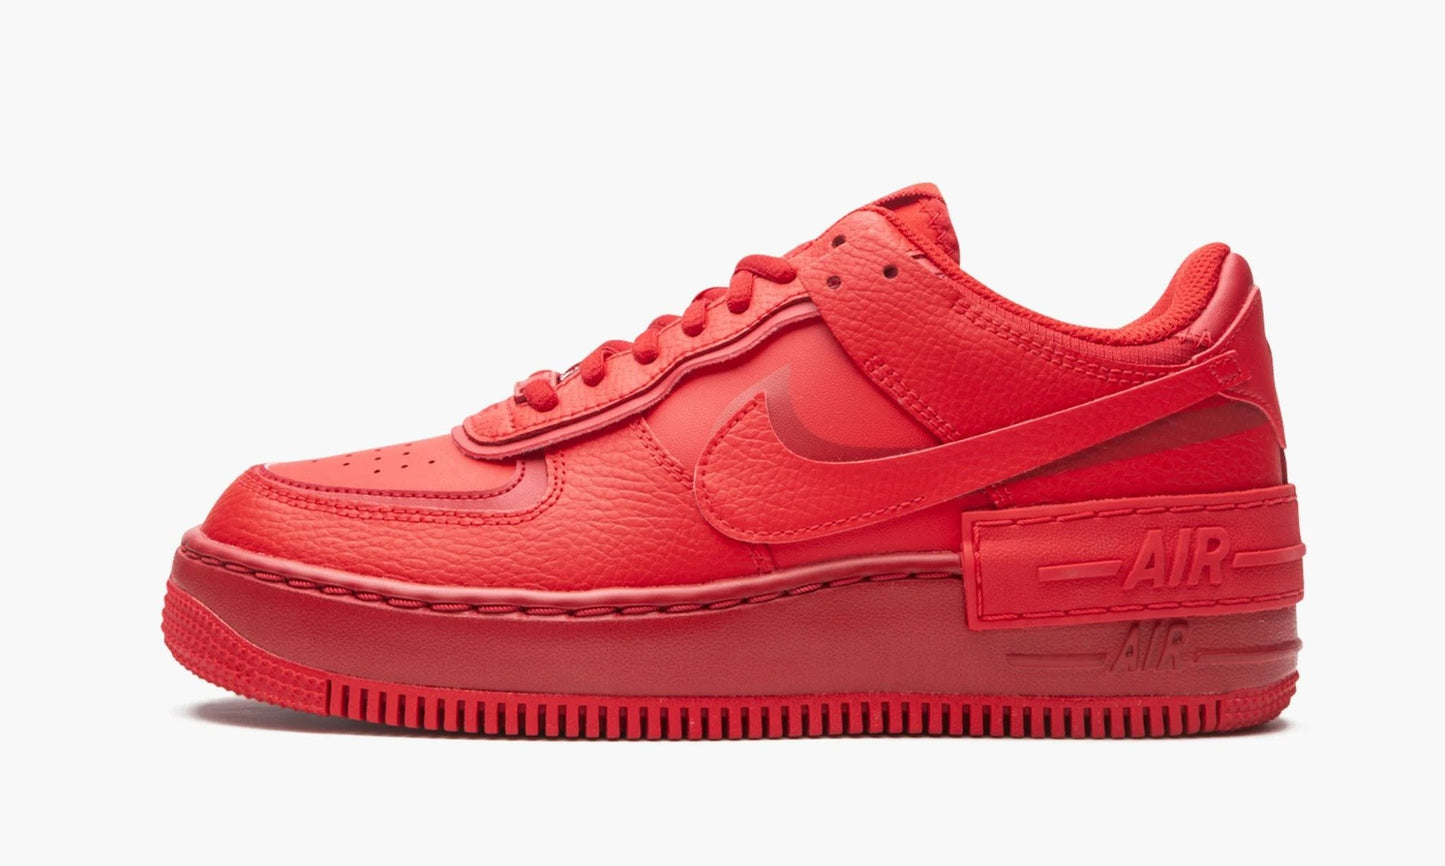 Force 1 Low Shadow WMNS “Triple Red”